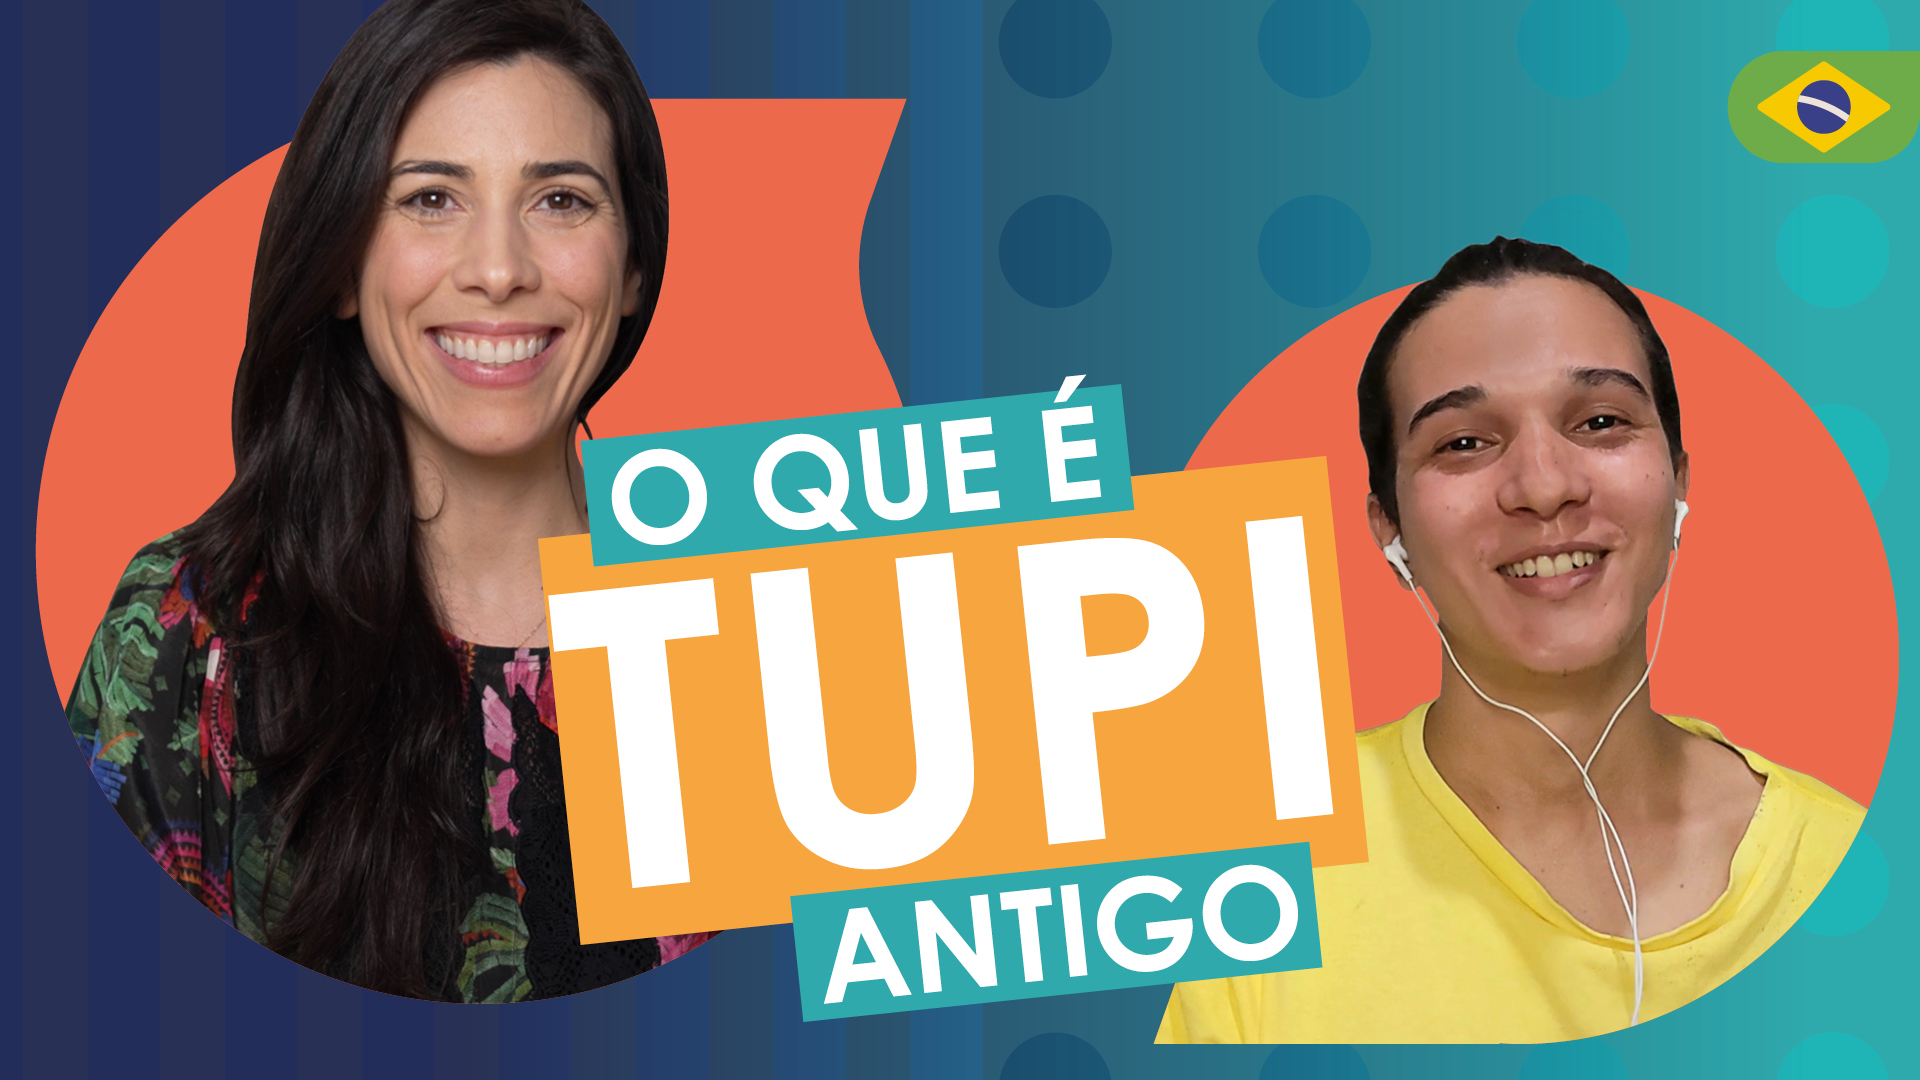 The Influence of Ancient Tupi on Brazilian Portuguese